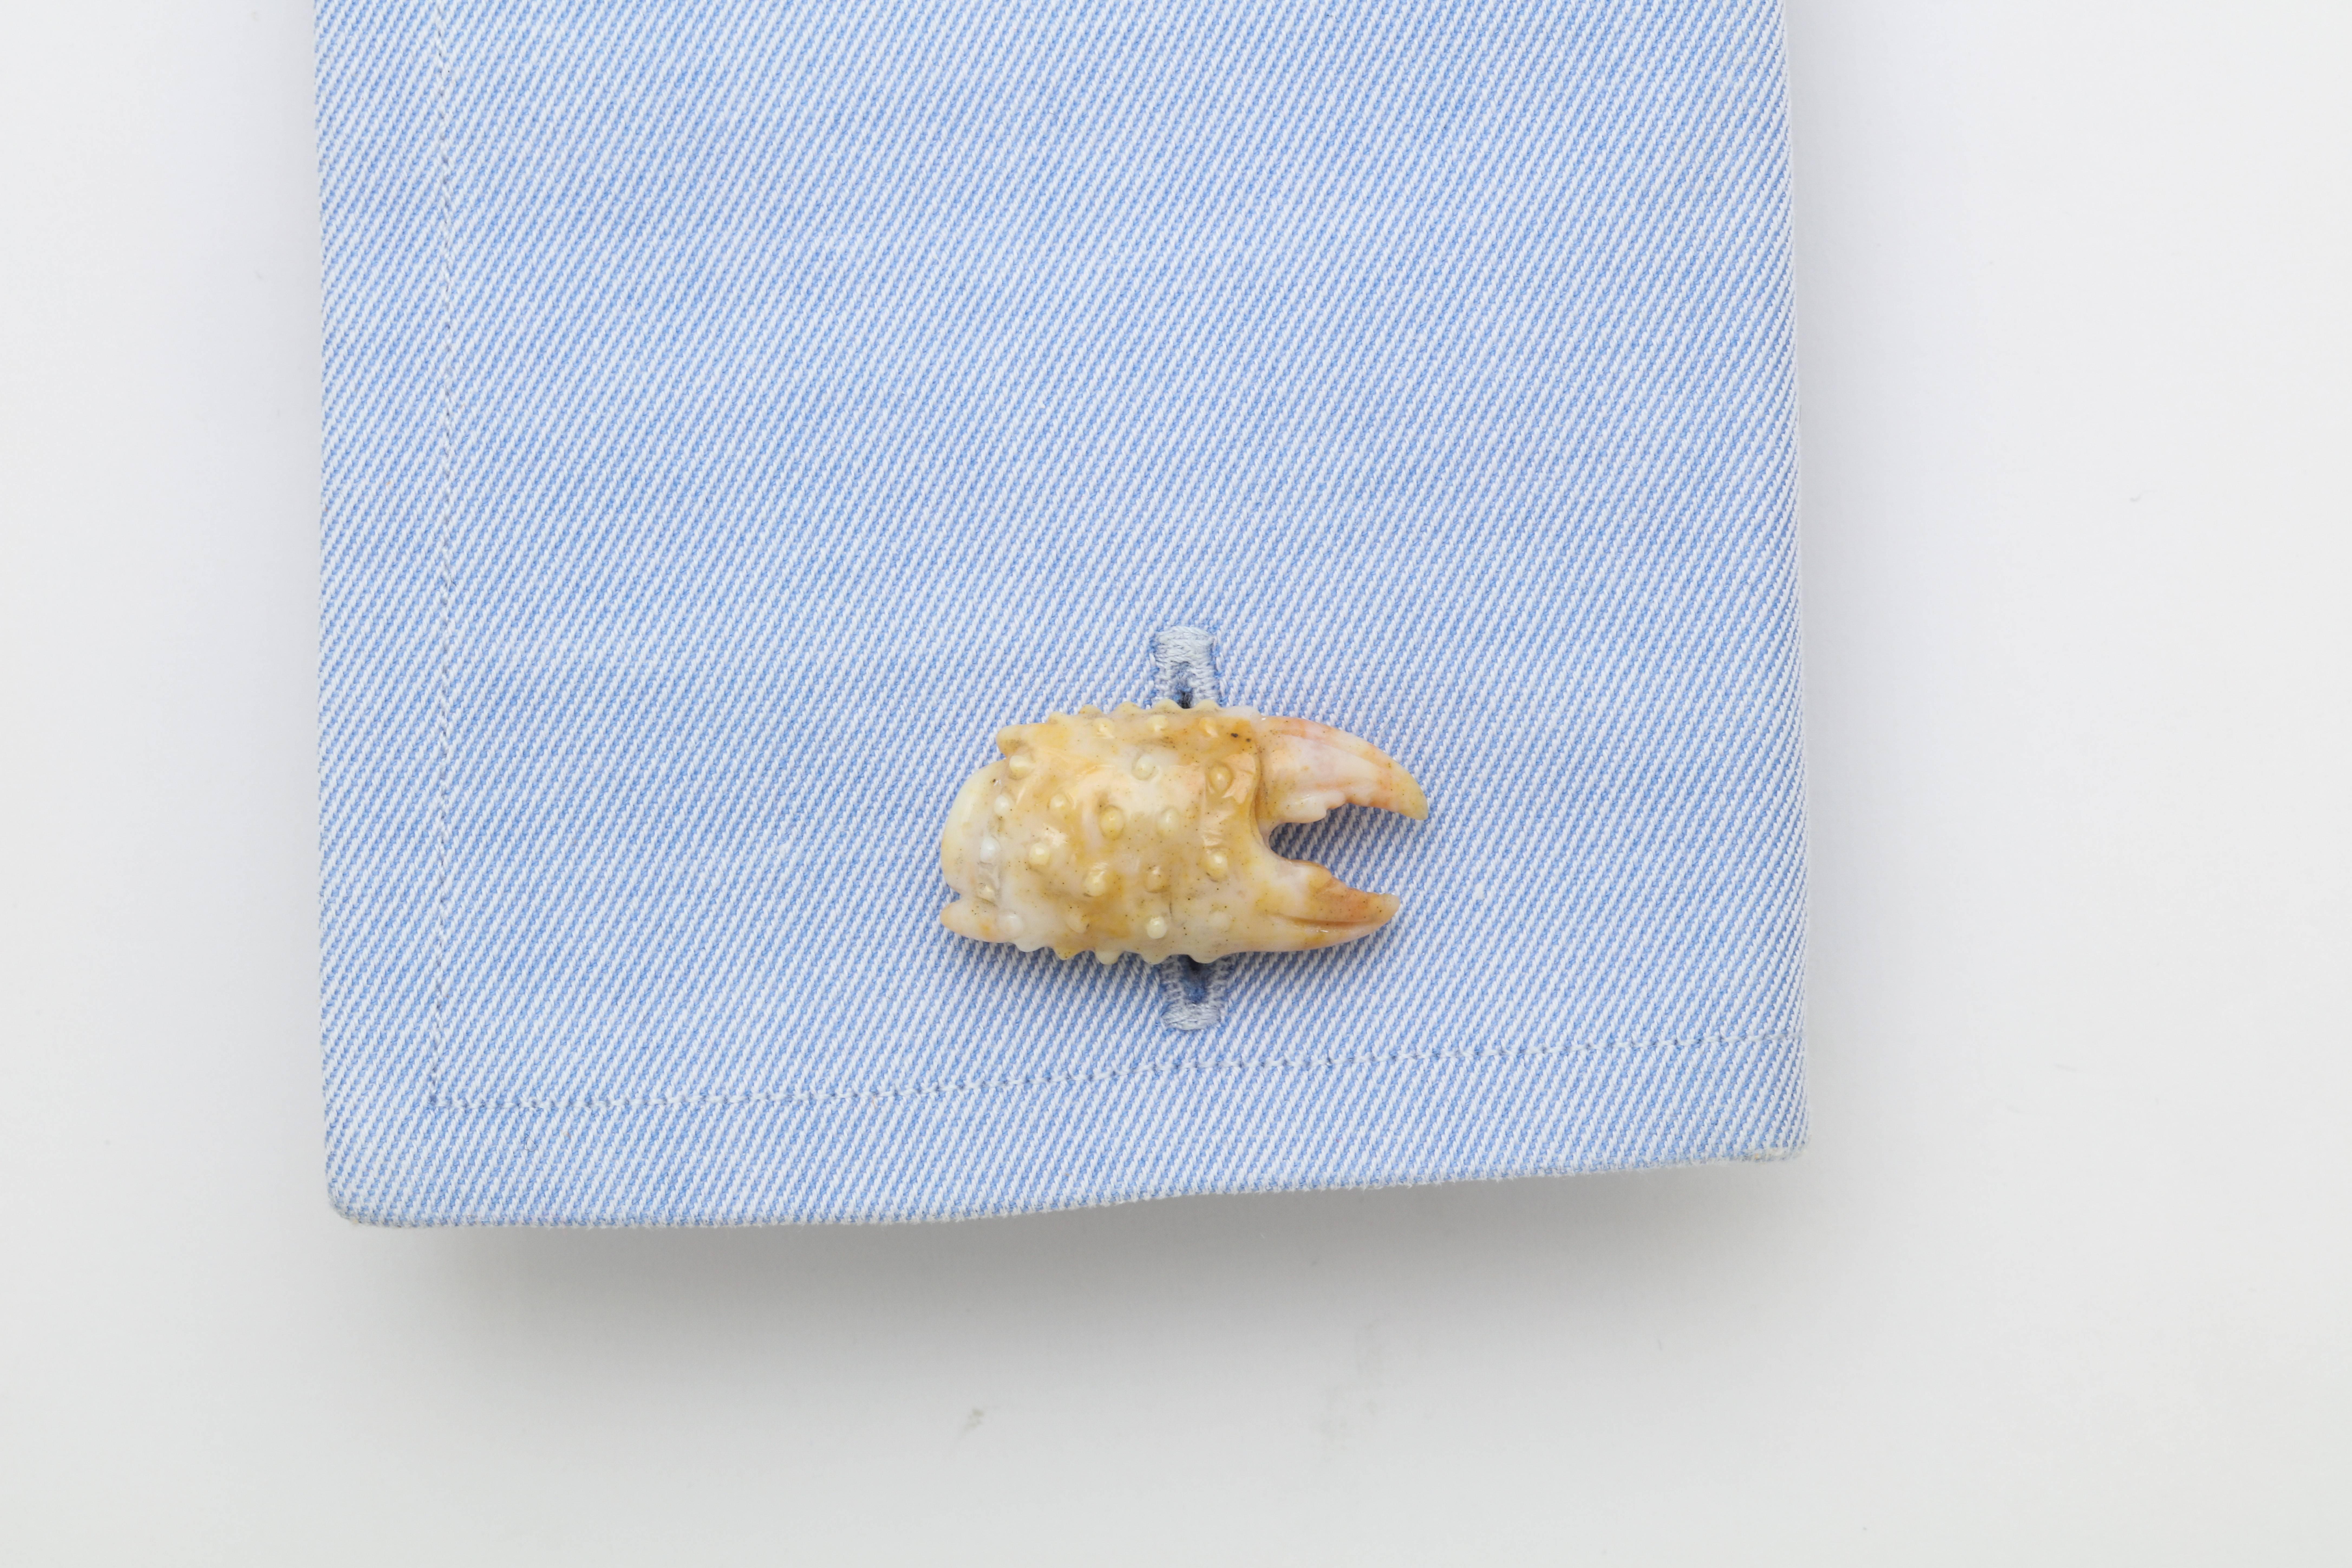 While you can only enjoy the delicacy of stone crab claws from October through May, these wonderful cufflinks can be worn all year long.  They are realistically carved from a particular type of chalcedony which is found in Madagascar.  Expertly